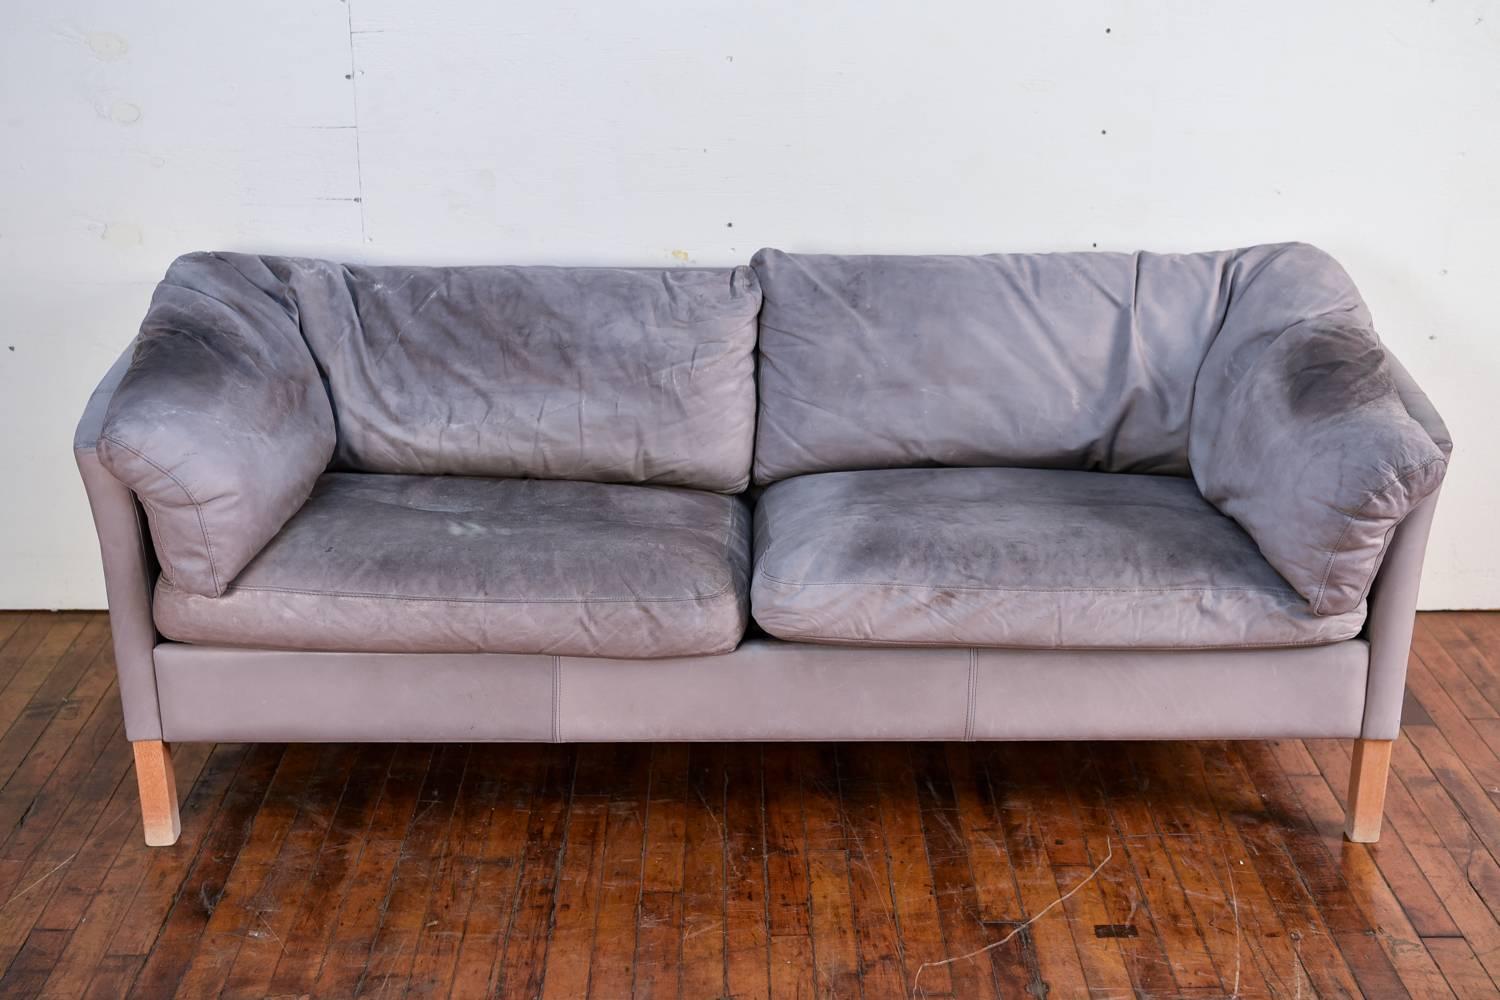 Mogens Hansen Model 35 sofa in gray leather upholstery. Wonderful Danish midcentury design. We have two of these available so you can purchase one single or as a pair.